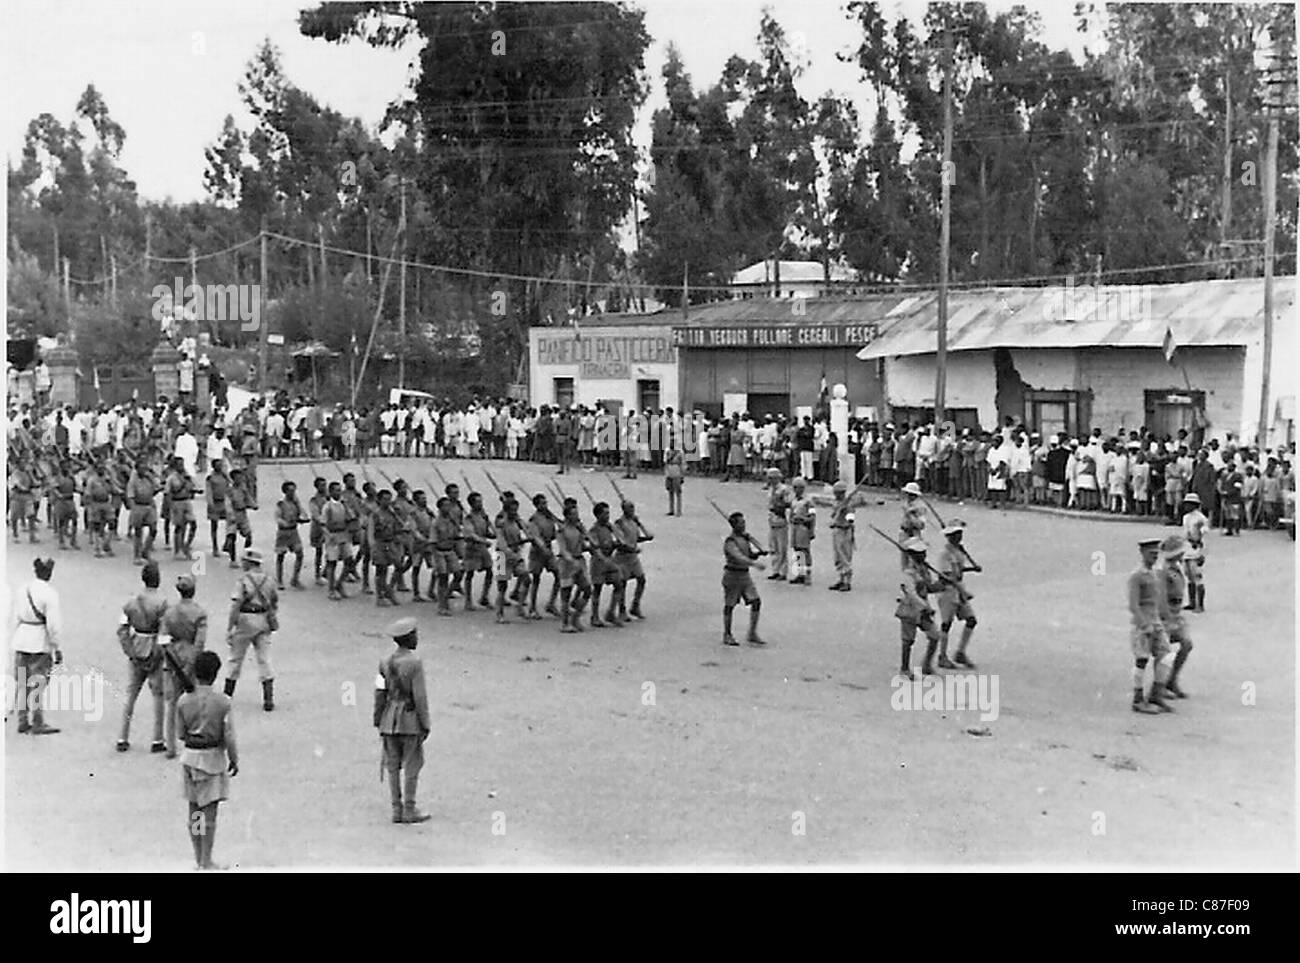 Haile Selassie Enters Addis Ababa After Exile, 5th May 1941 Stock Photo